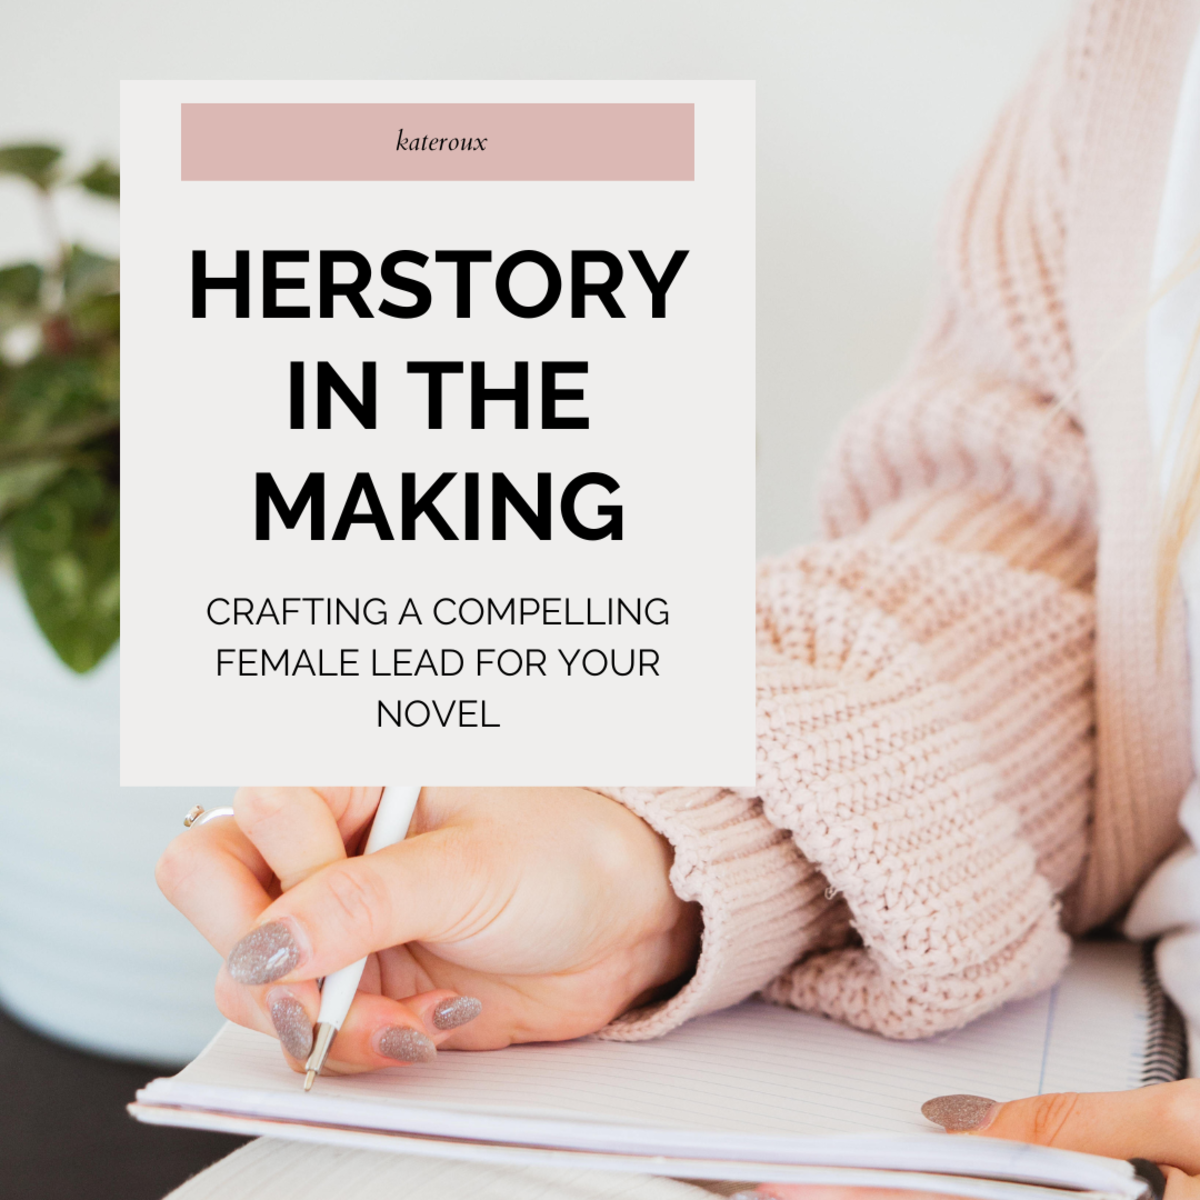 Herstory in the Making: Crafting a Compelling Female Lead for Your Novel